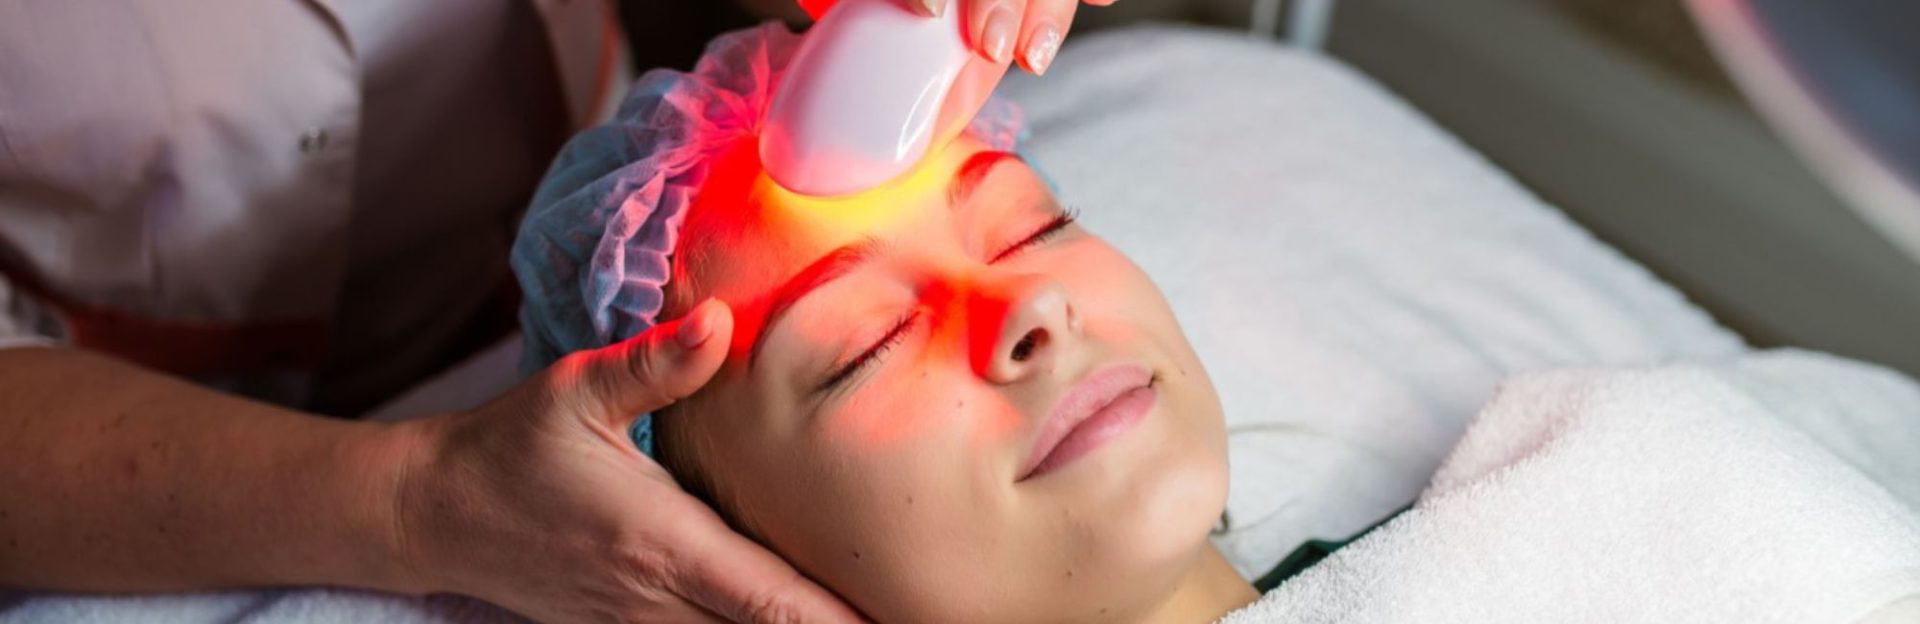 AFT Photofacial Clinic in Udaipur, AFT Photofacial in Udaipur, Best AFT Photofacial Treatment, Photofacial treatment doctor in udaipur, Photofacial treatment center in udaipur